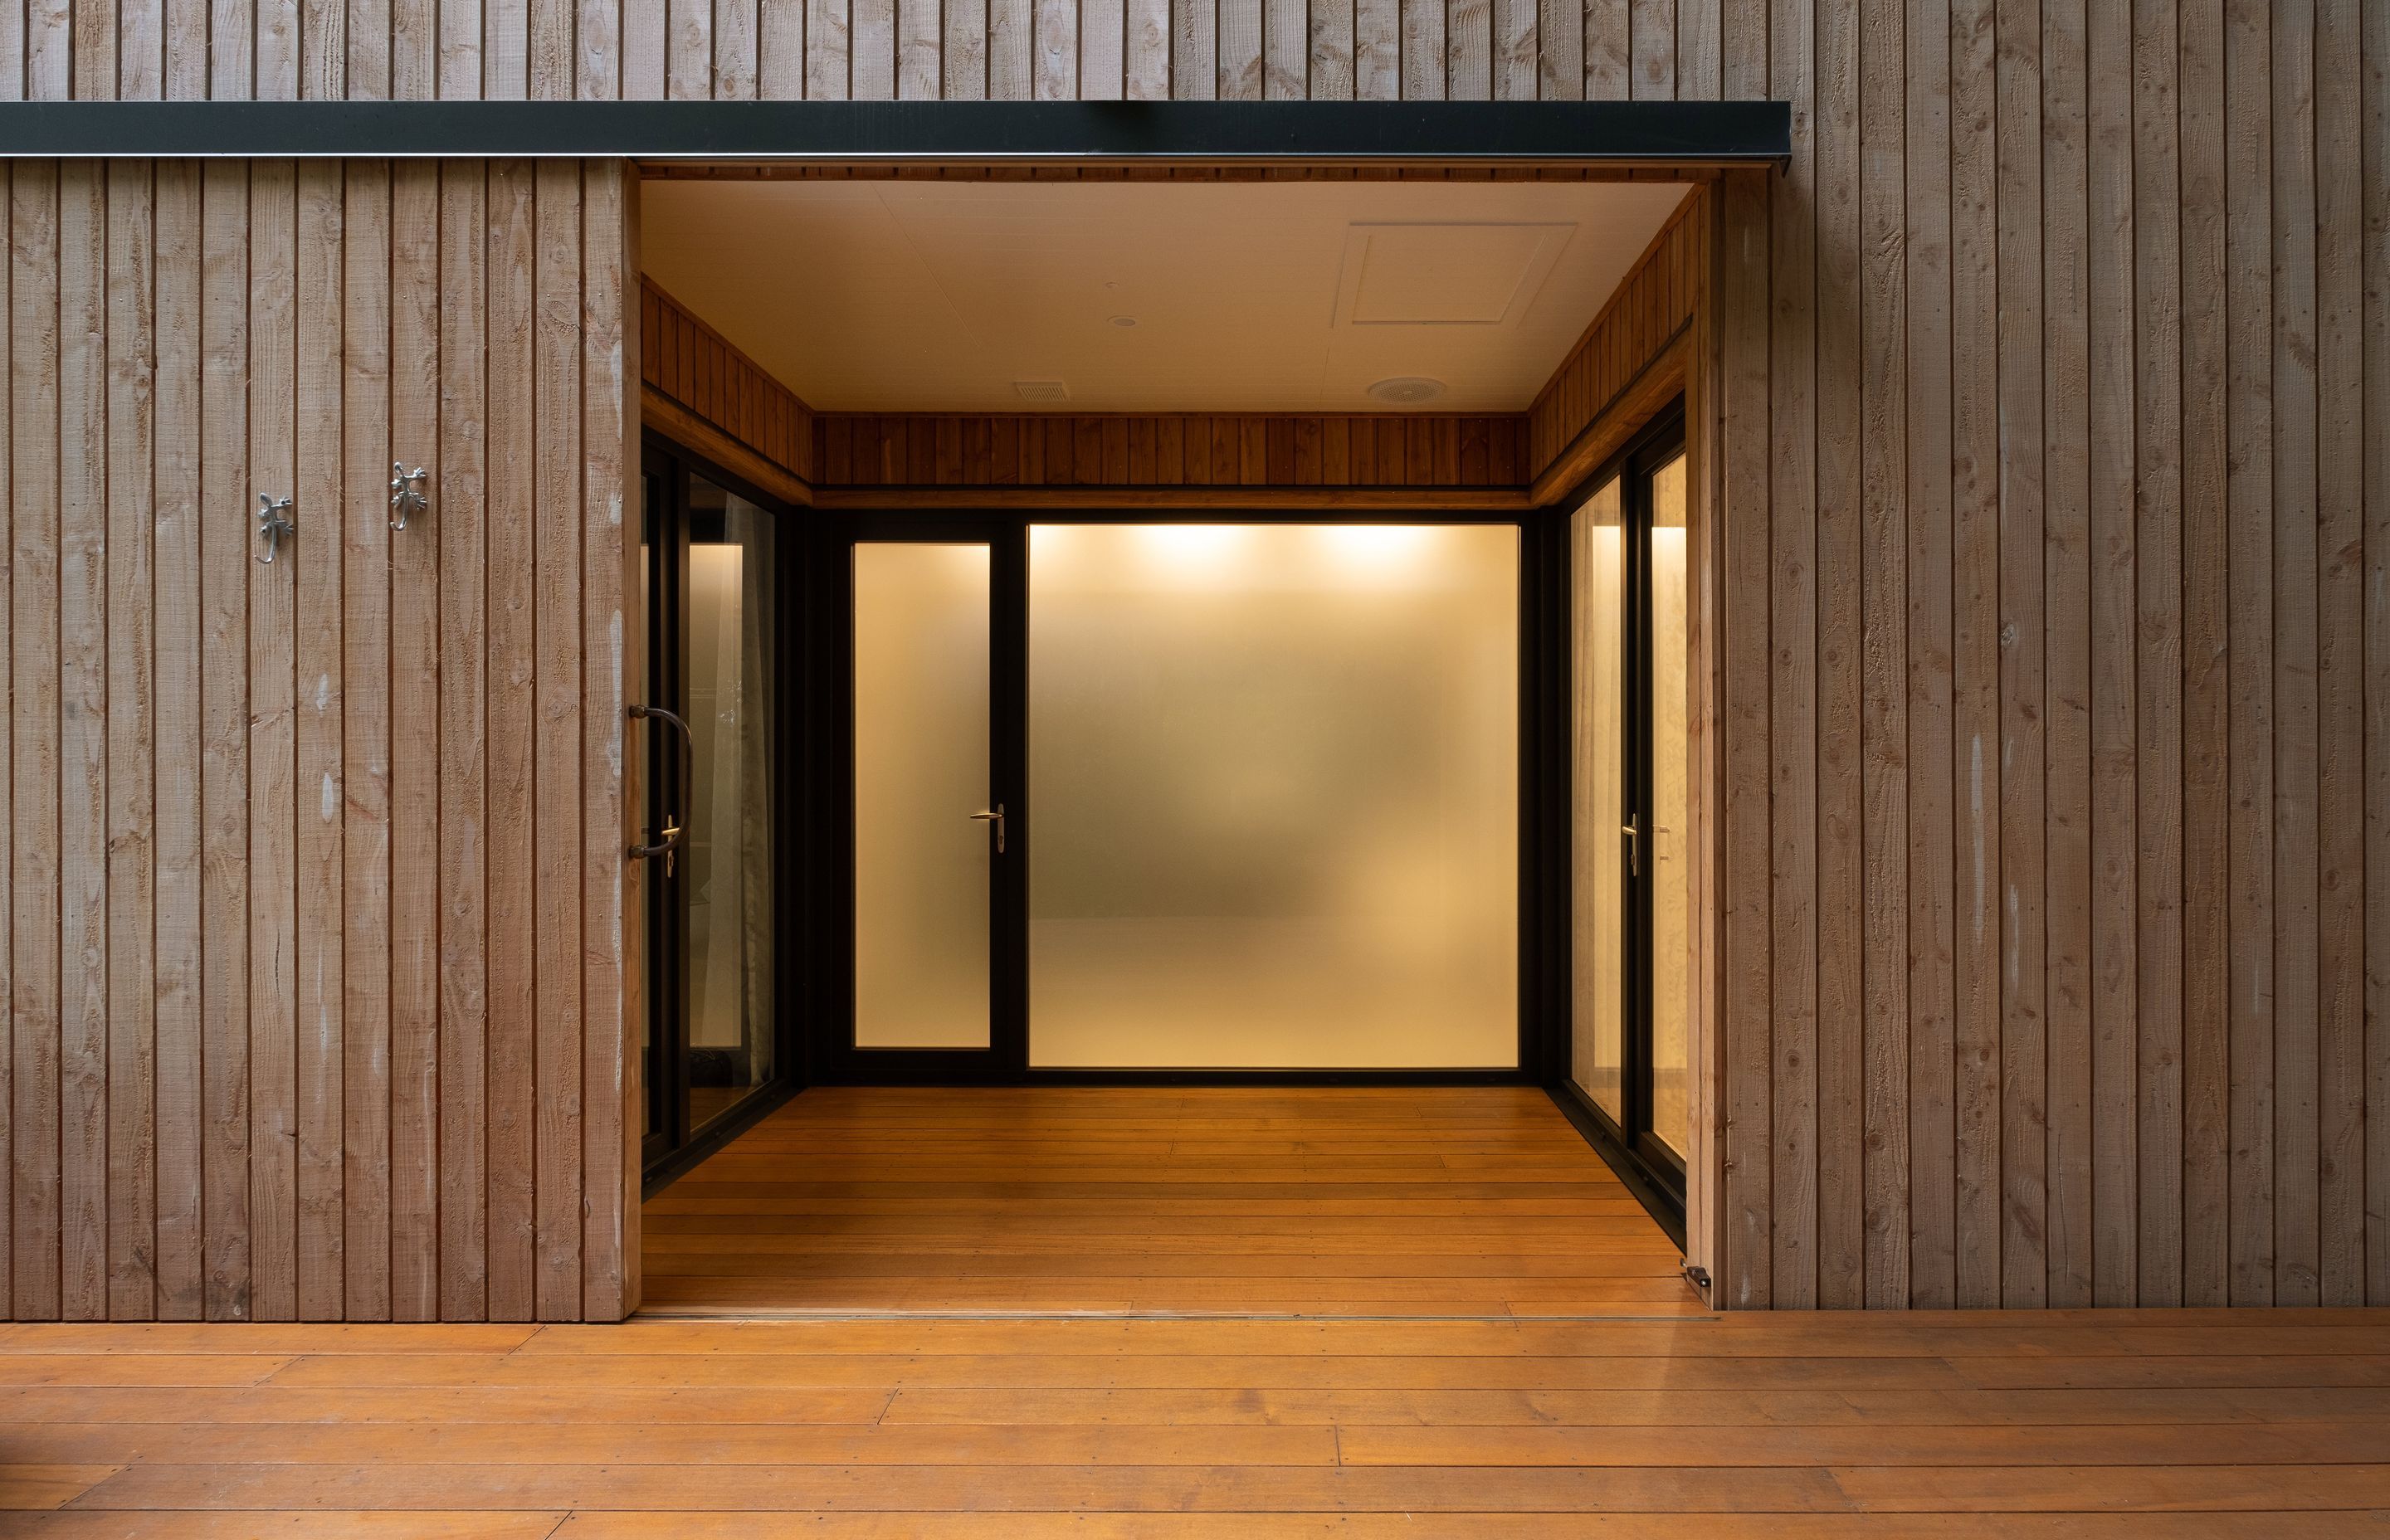 The entry space connects the three 'cells' that comprise the building and compels visitors to venture outside in order to move between the spaces.